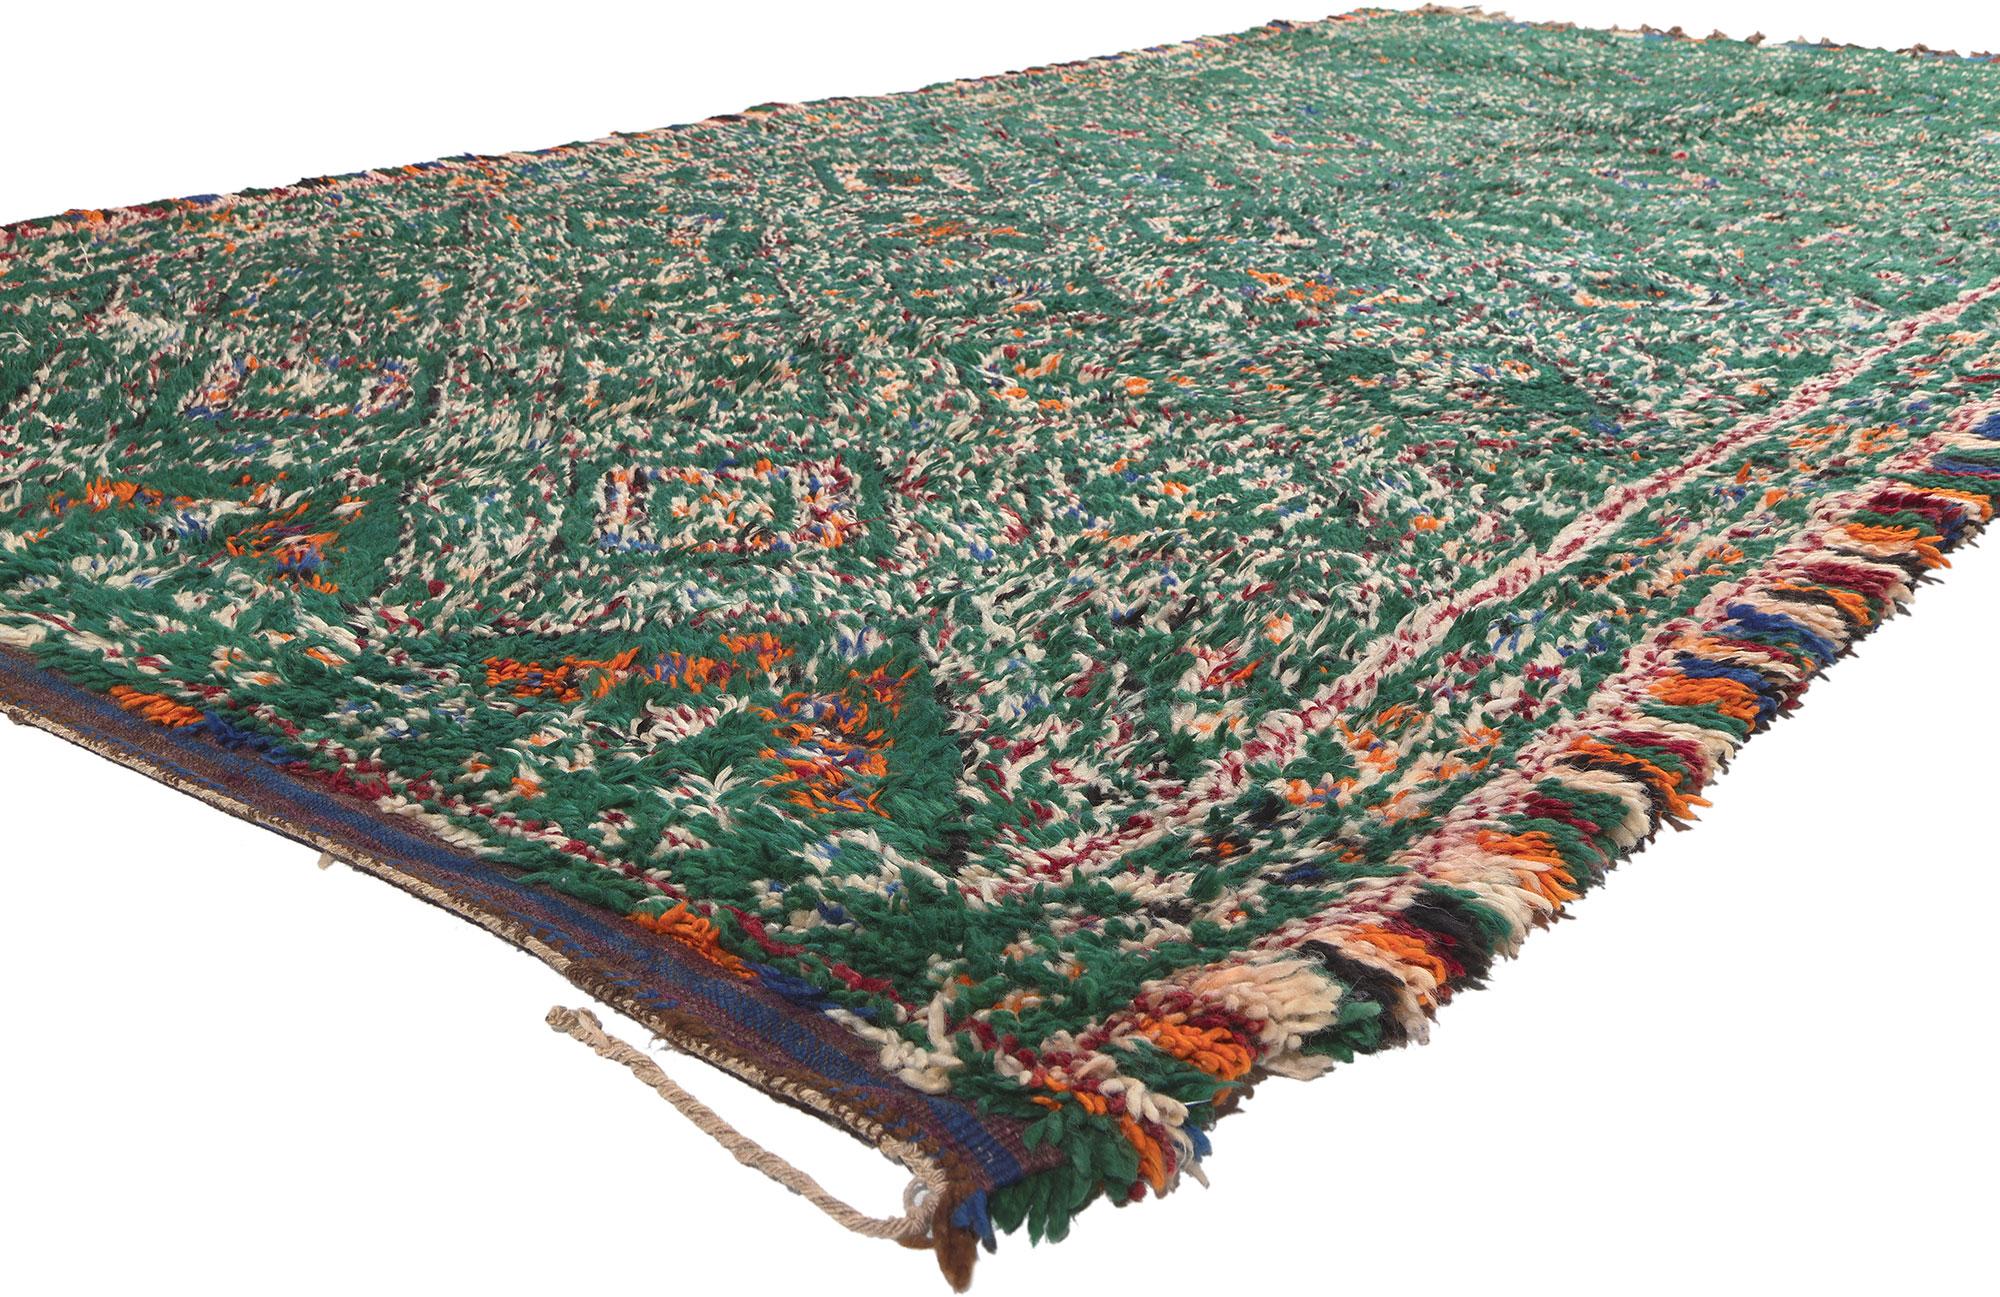 20662 Vintage Green Beni MGuild Moroccan Rug, 06'05 x 12'06. Beni Mguild rugs are made by Berber women from the Ait M'Guild tribe in the Atlas Mountains of Morocco. They are made of high-quality wool using the old Moroccan method of weaving and